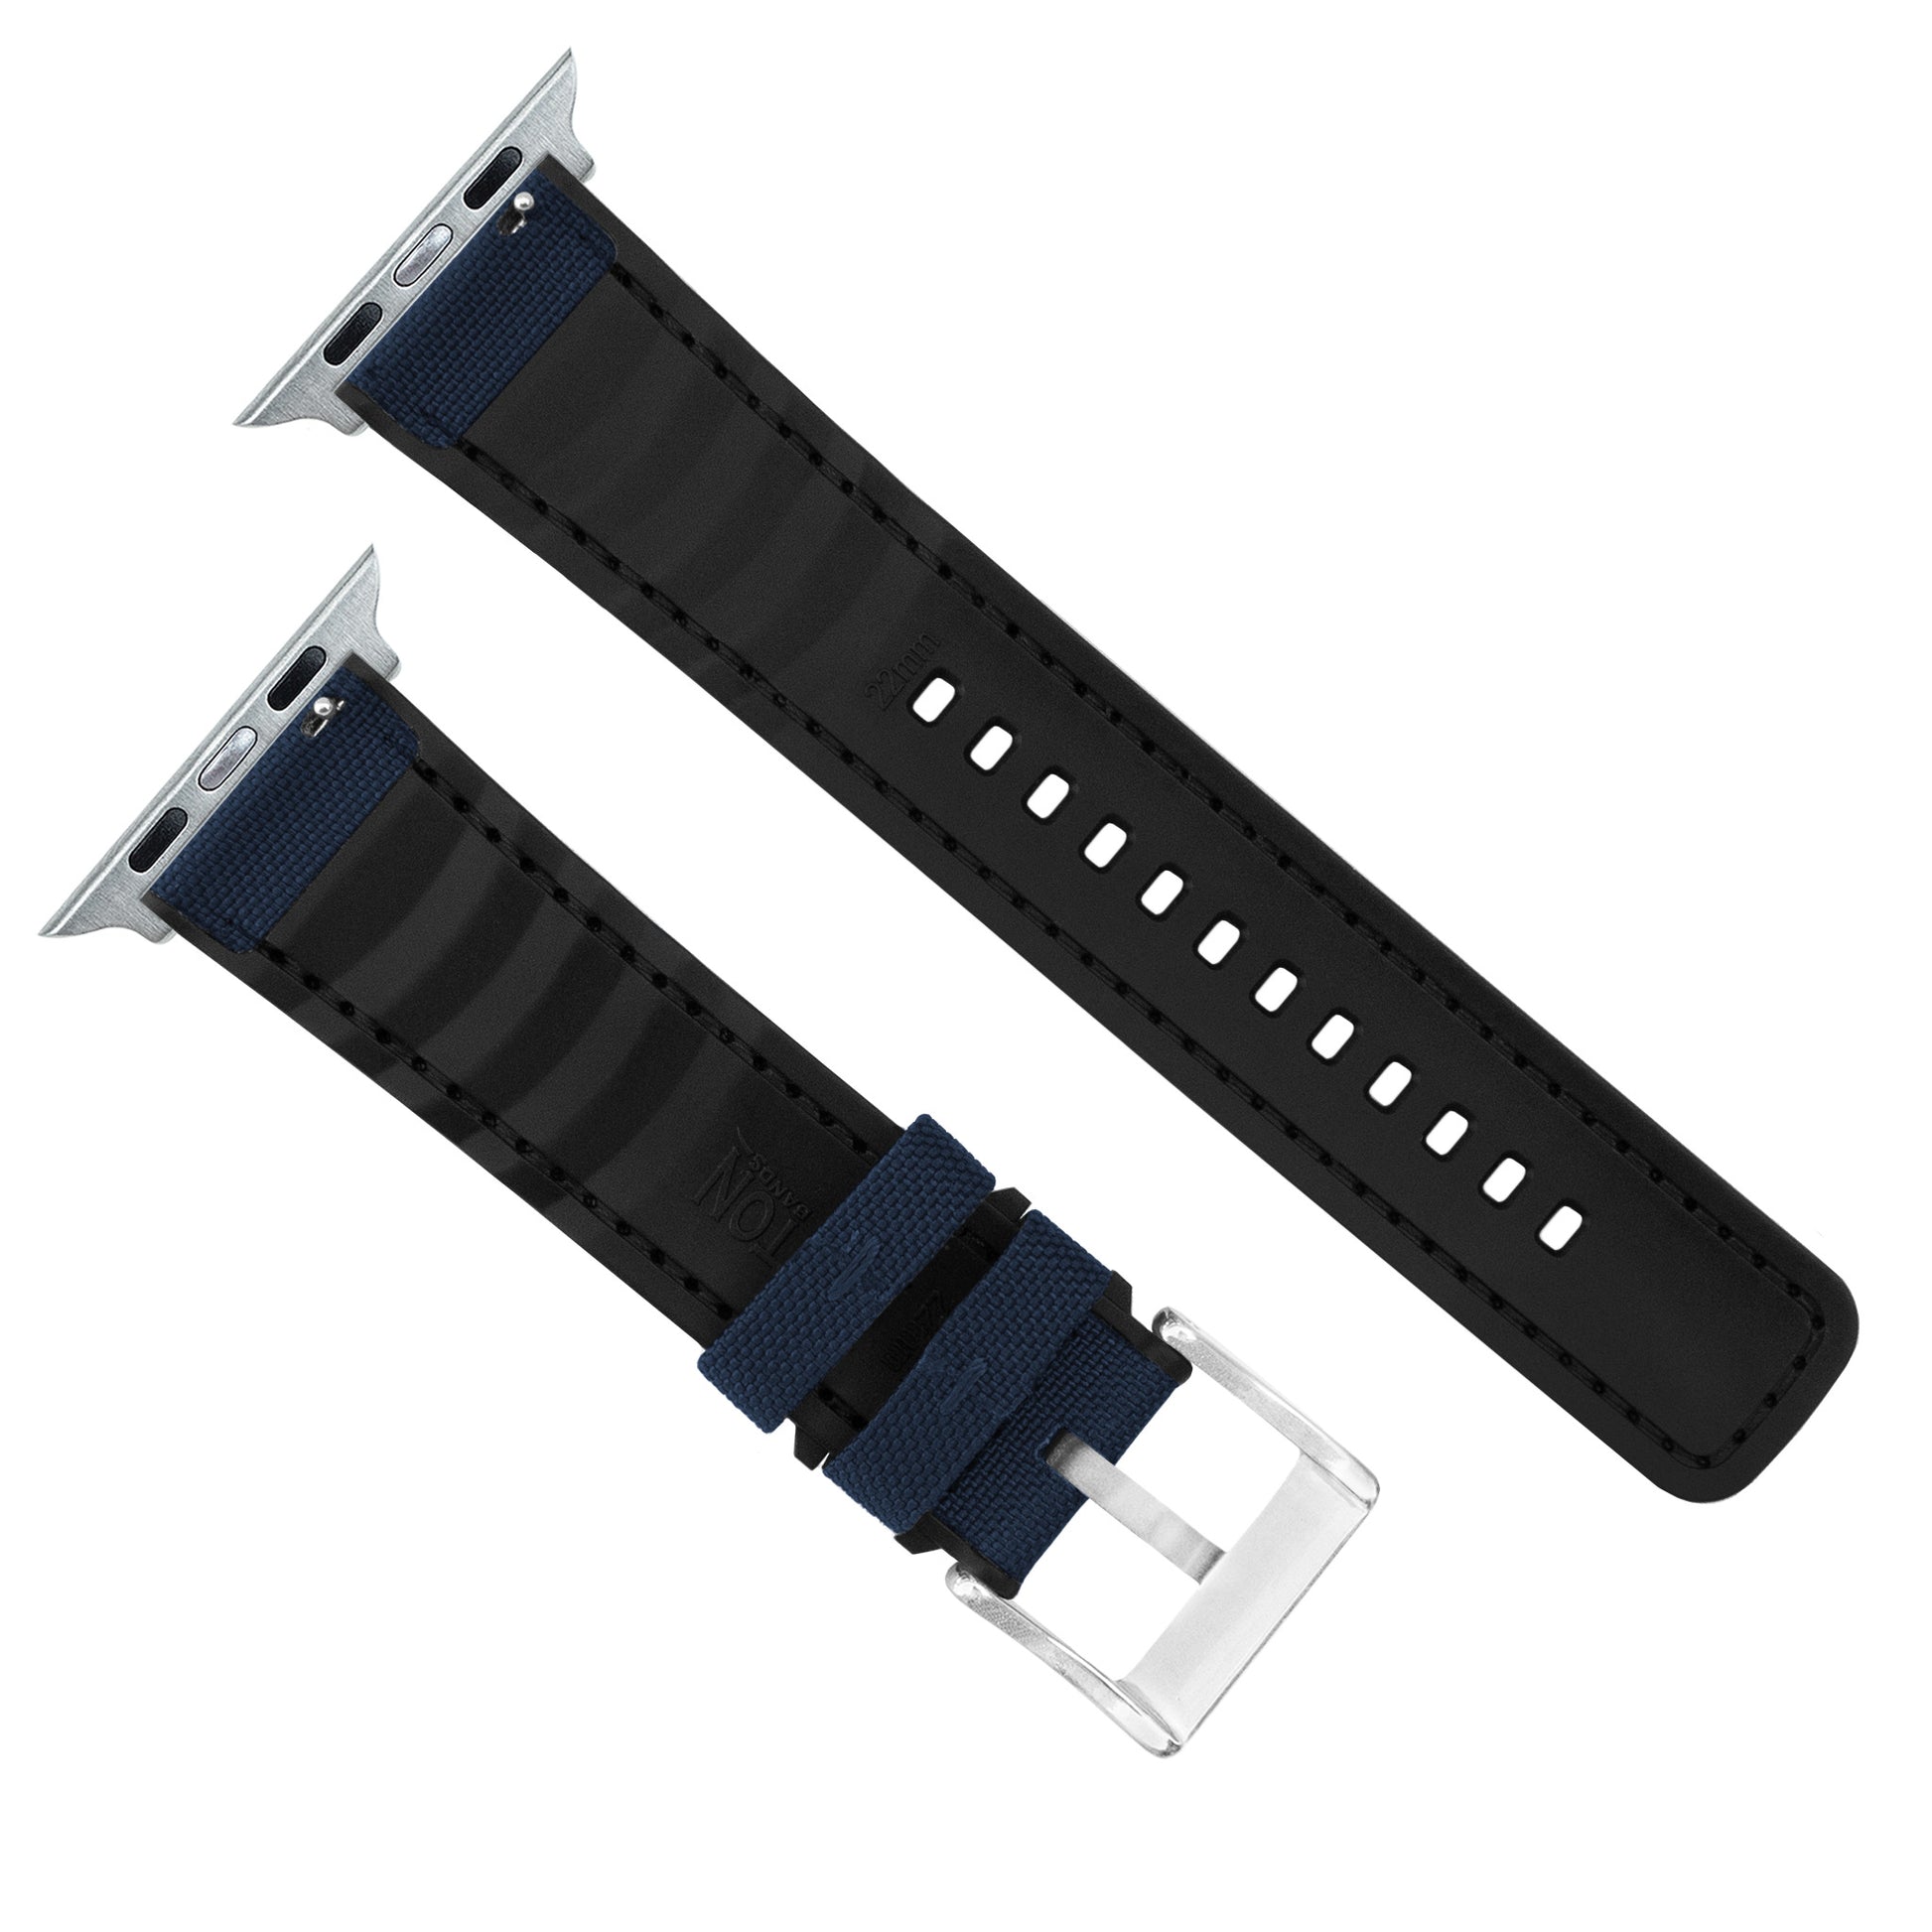 Apple Watch | Navy Blue Cordura Fabric and Silicone Hybrid - Barton Watch Bands